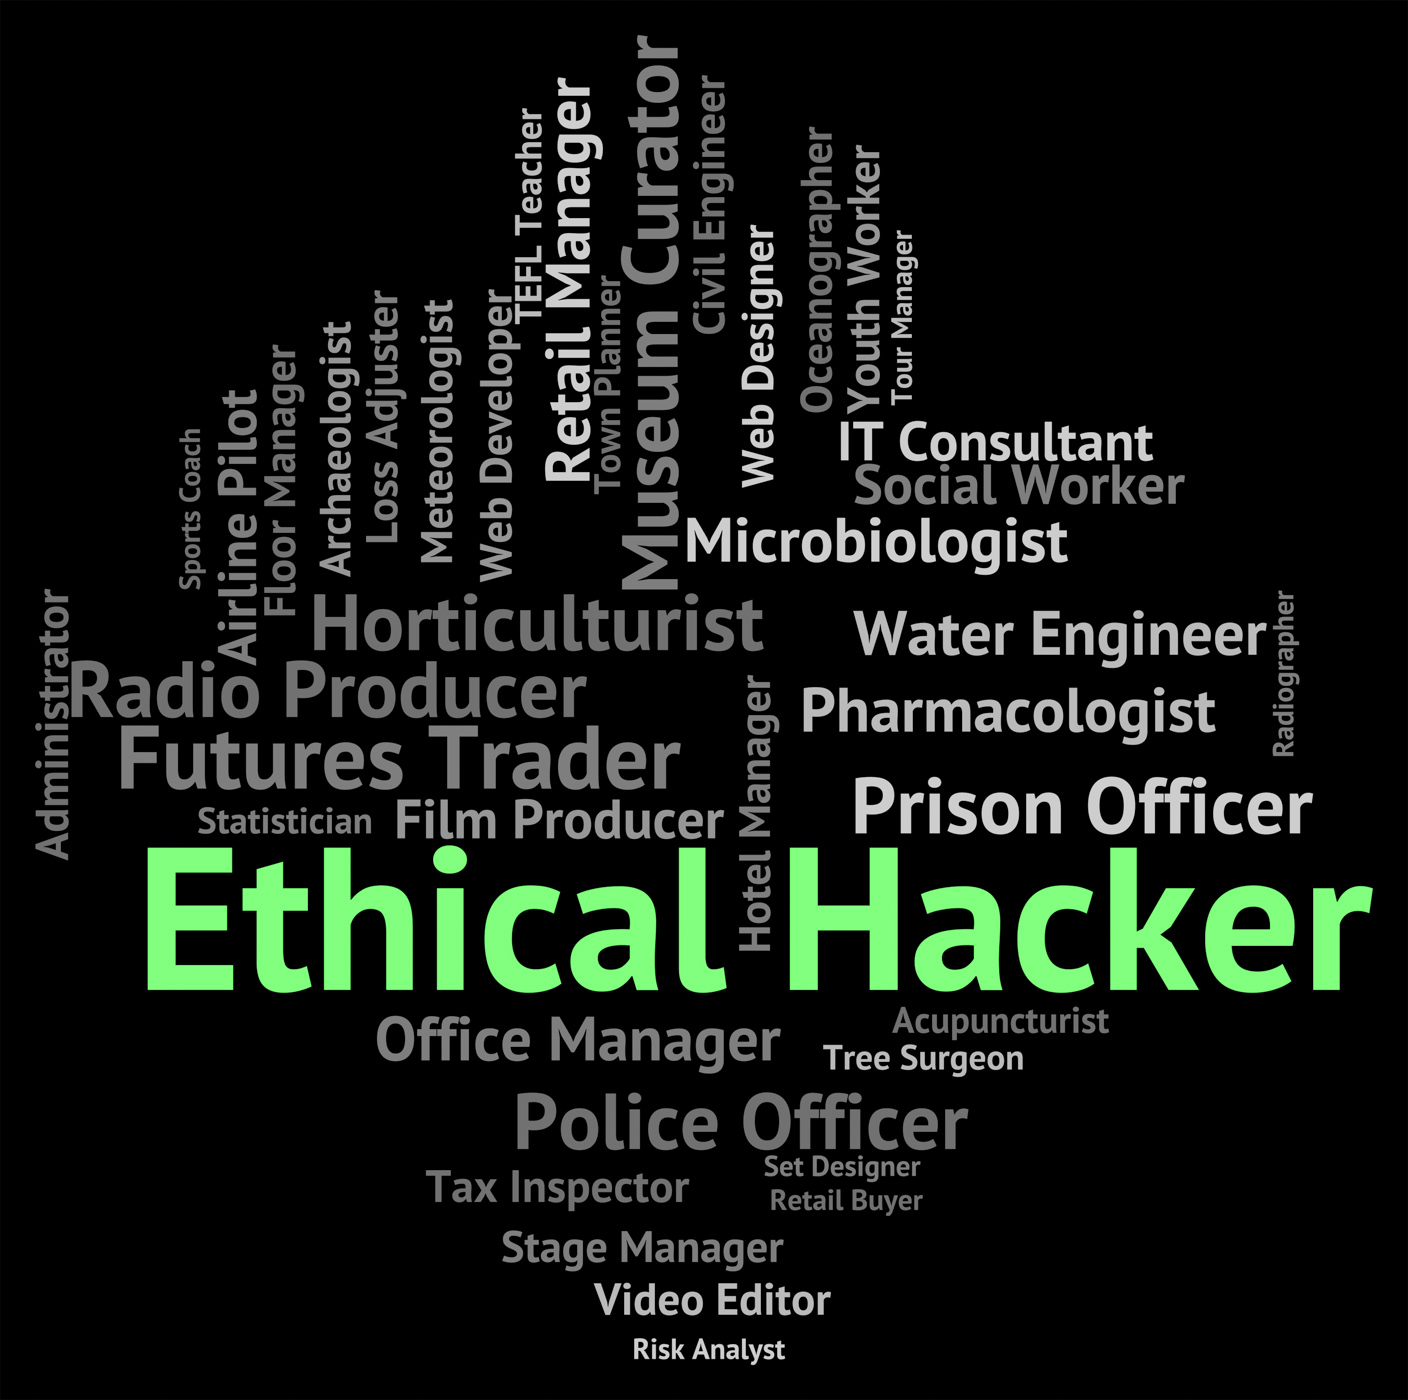 Ethical hacker indicates out sourcing and attack photo